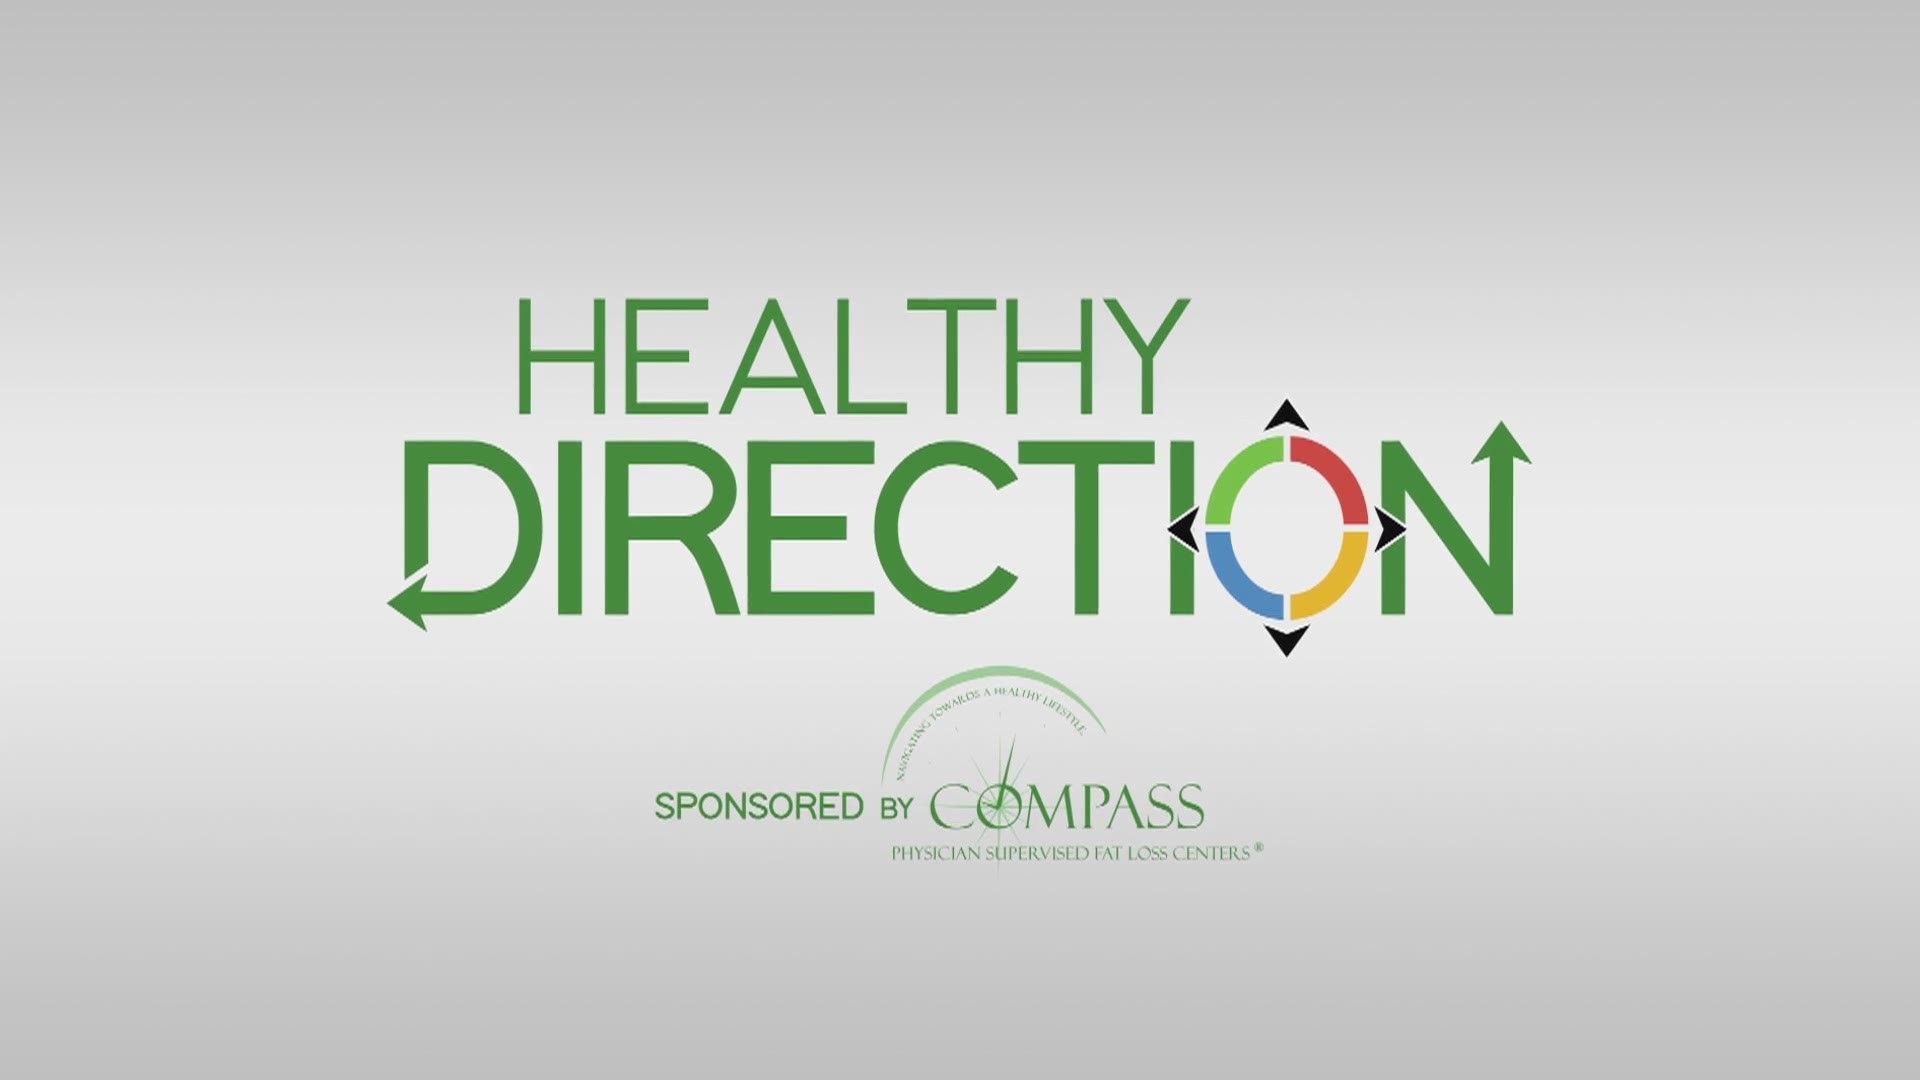 This edition of Healthy Direction welcomes Dr. Kusher from Compass Fat Loss to talk about how to successfully keep weight off.